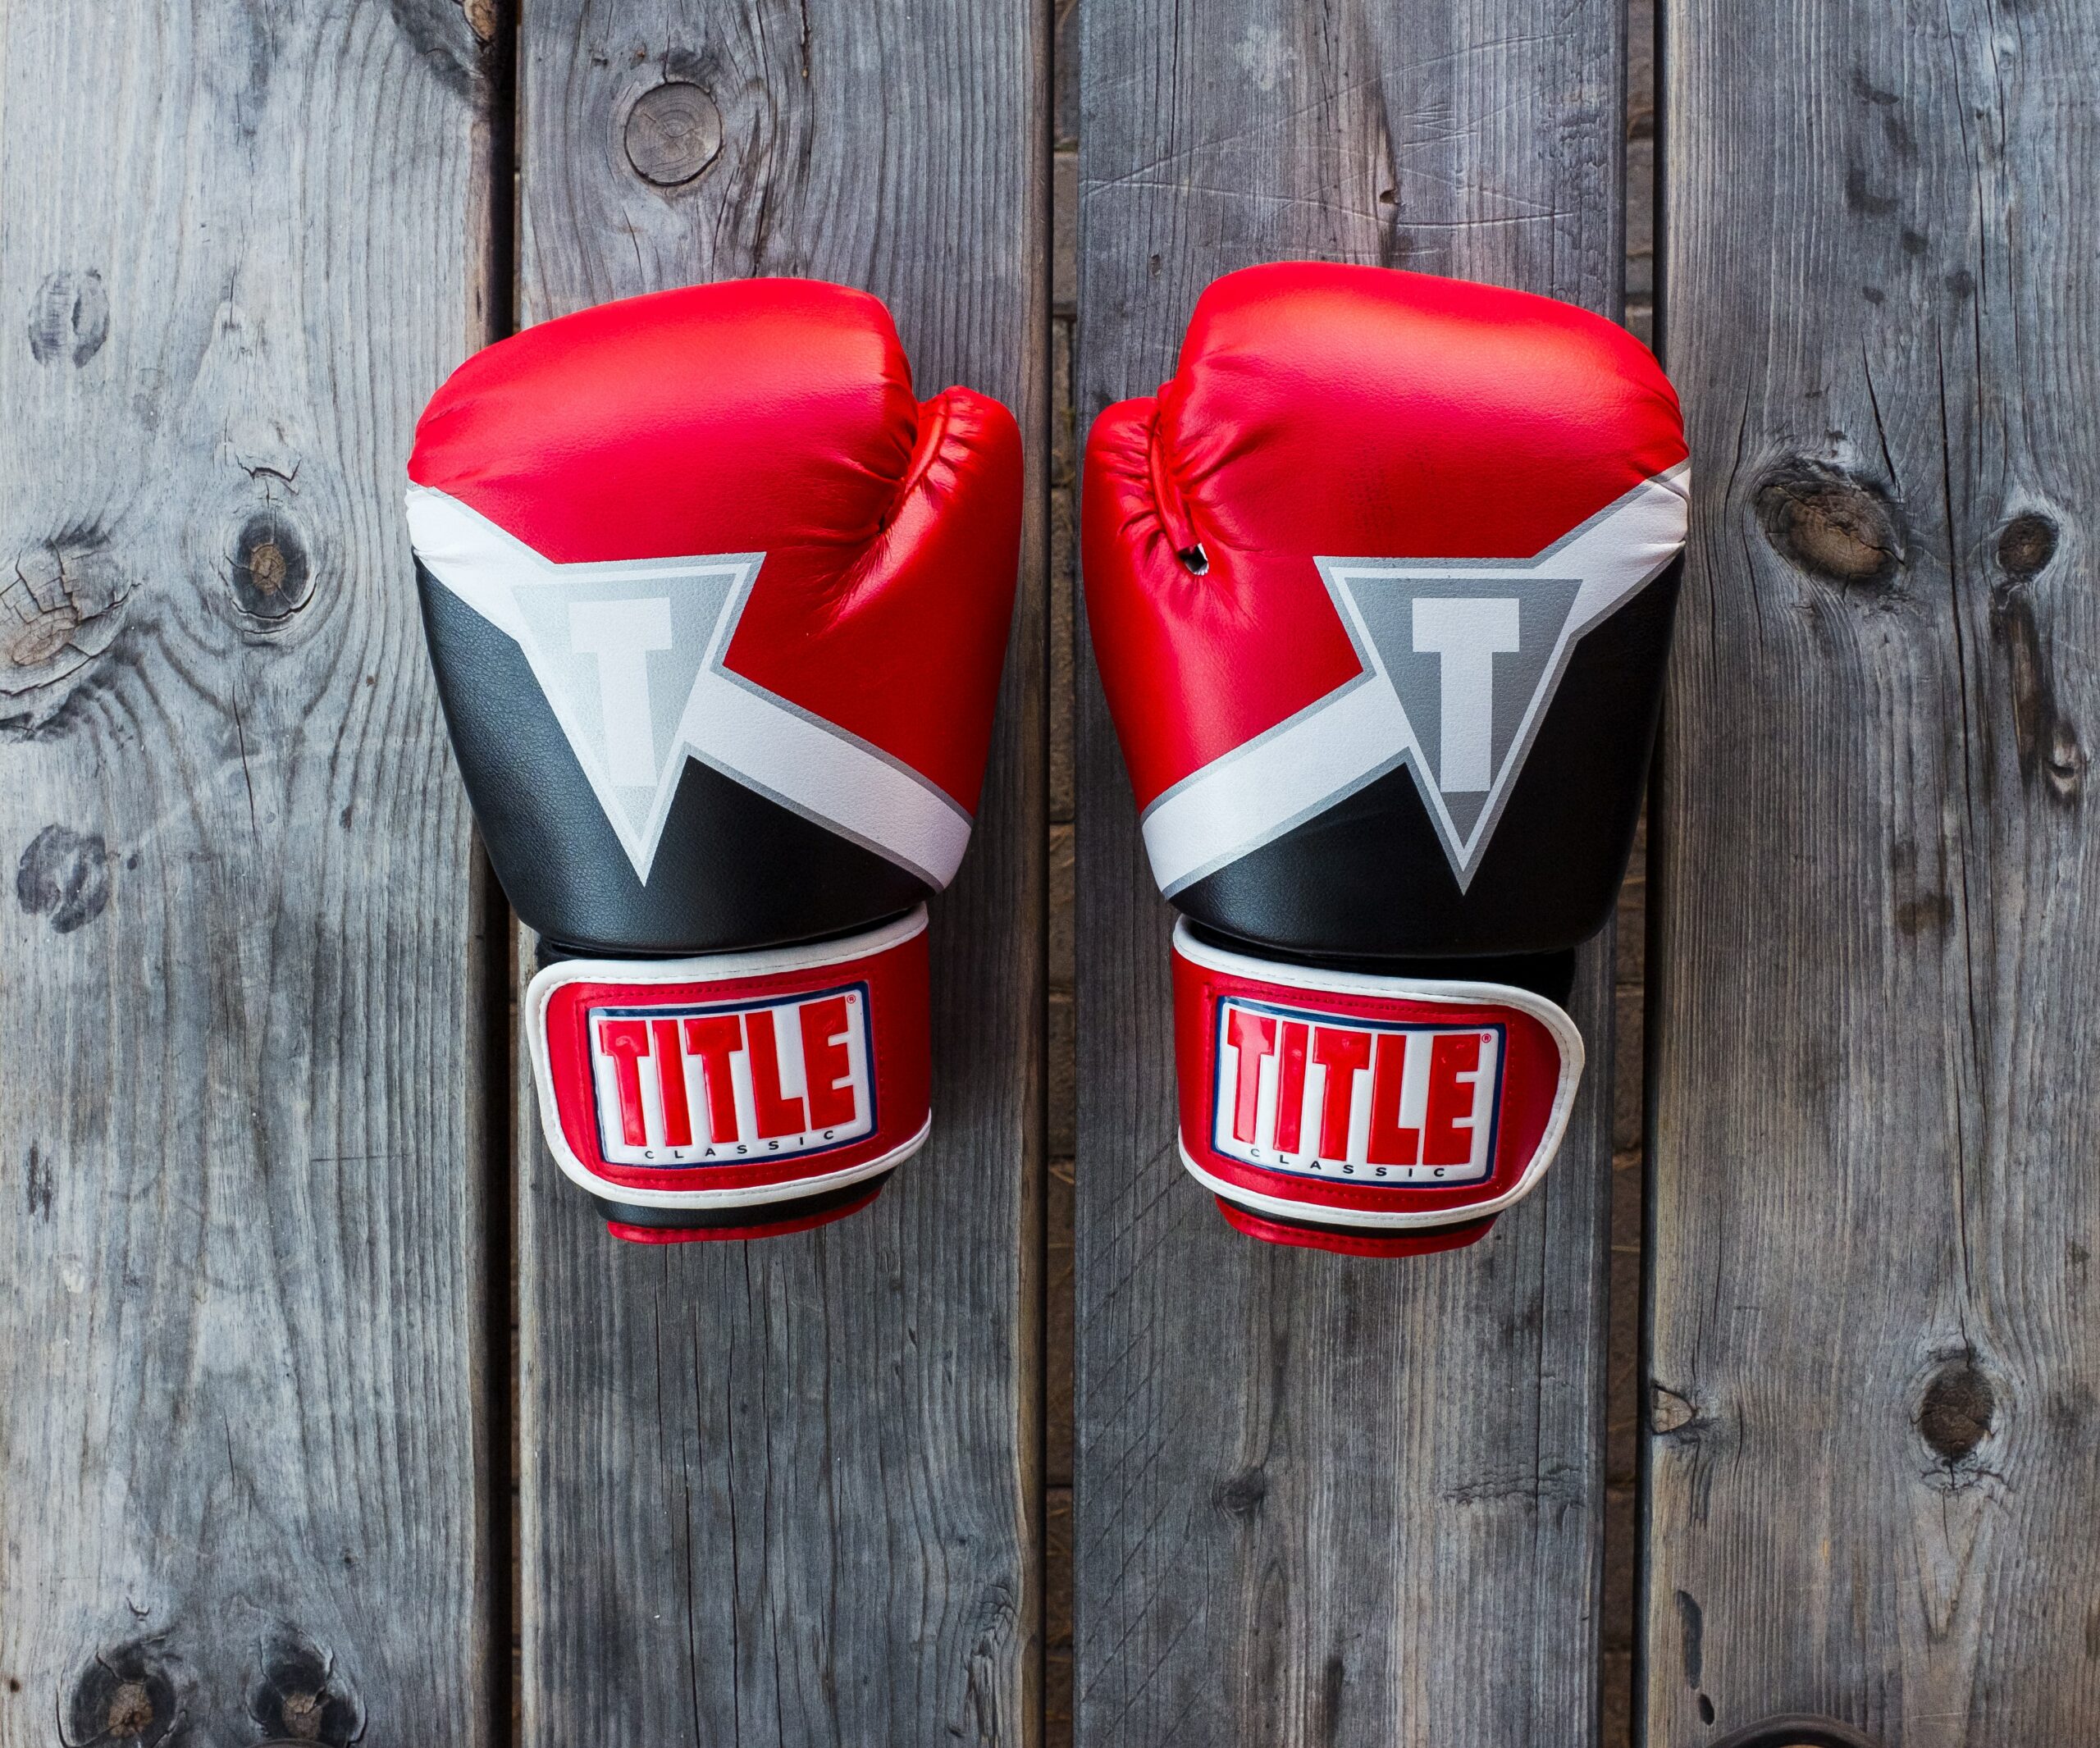 Black and white boxing gloves on a wooden deck symbolize not arguing.